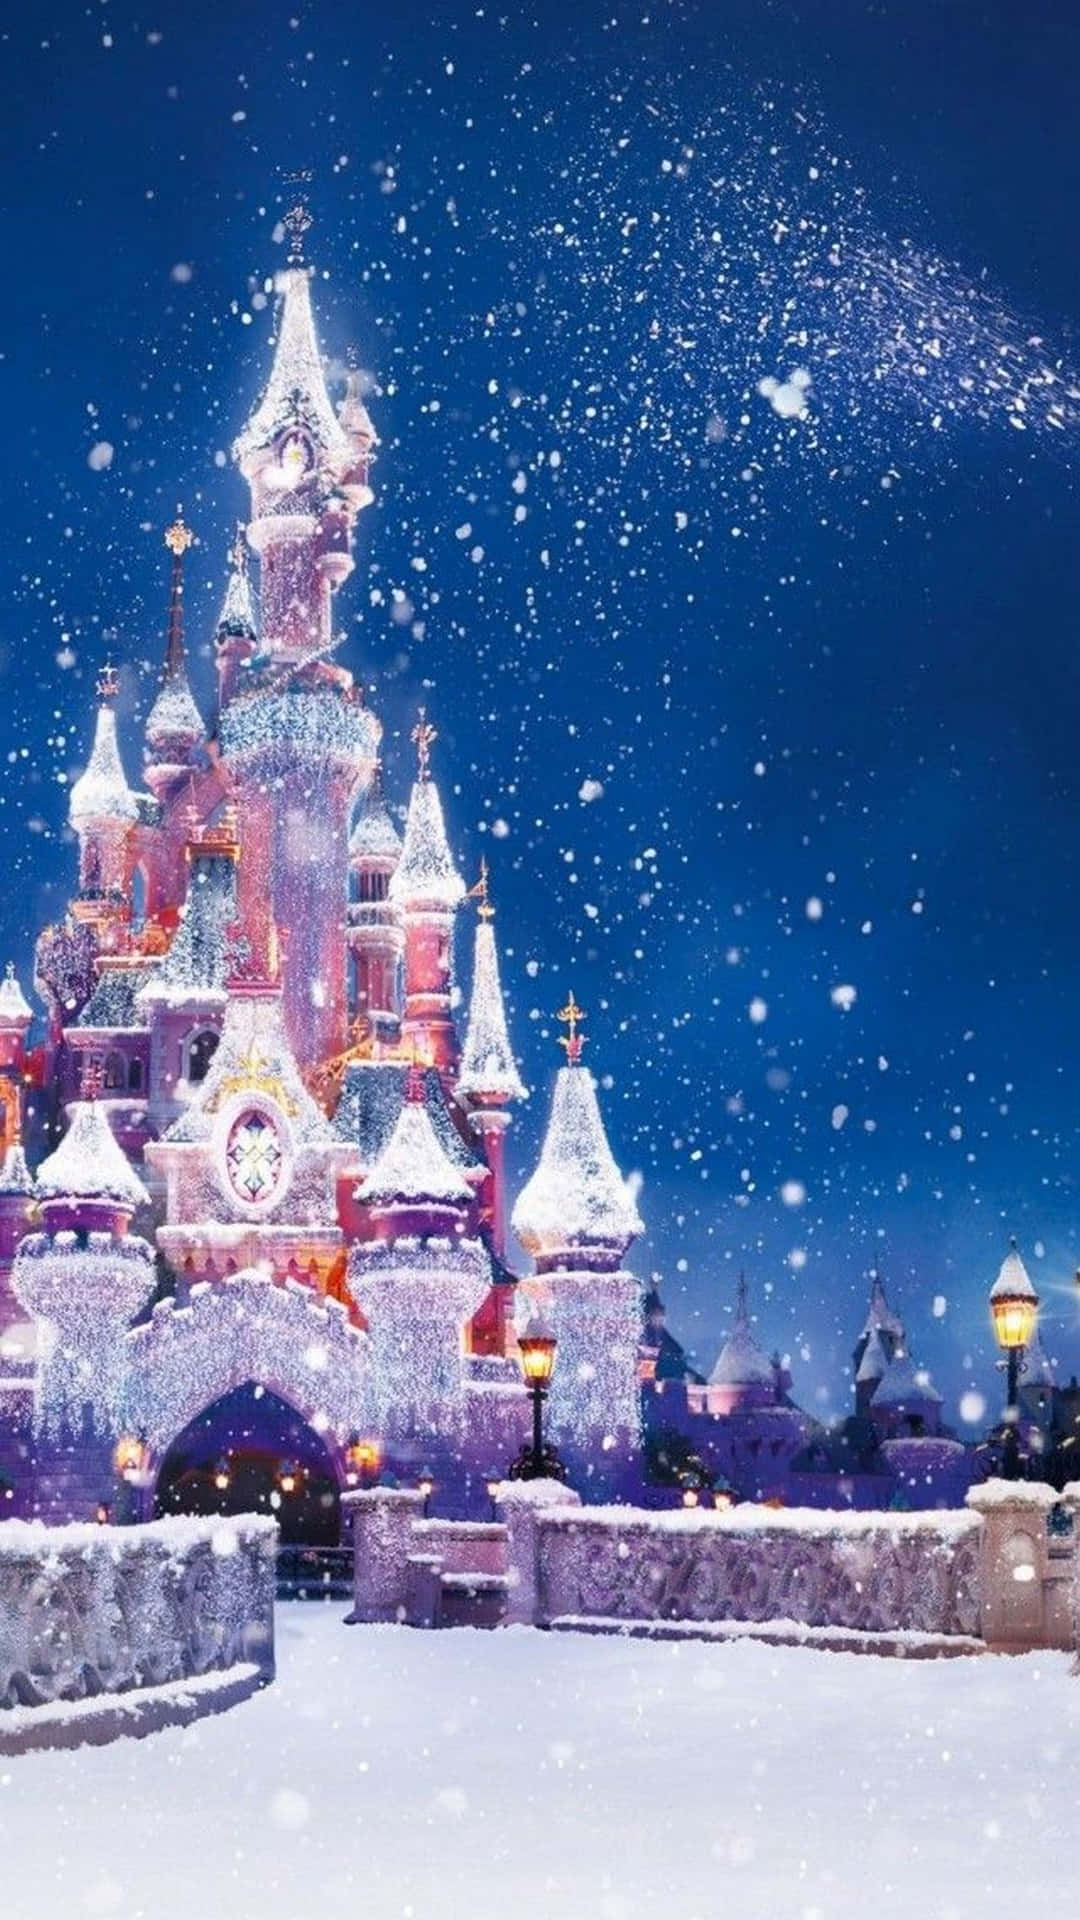 A Castle Is Covered In Snow And Snowflakes Background